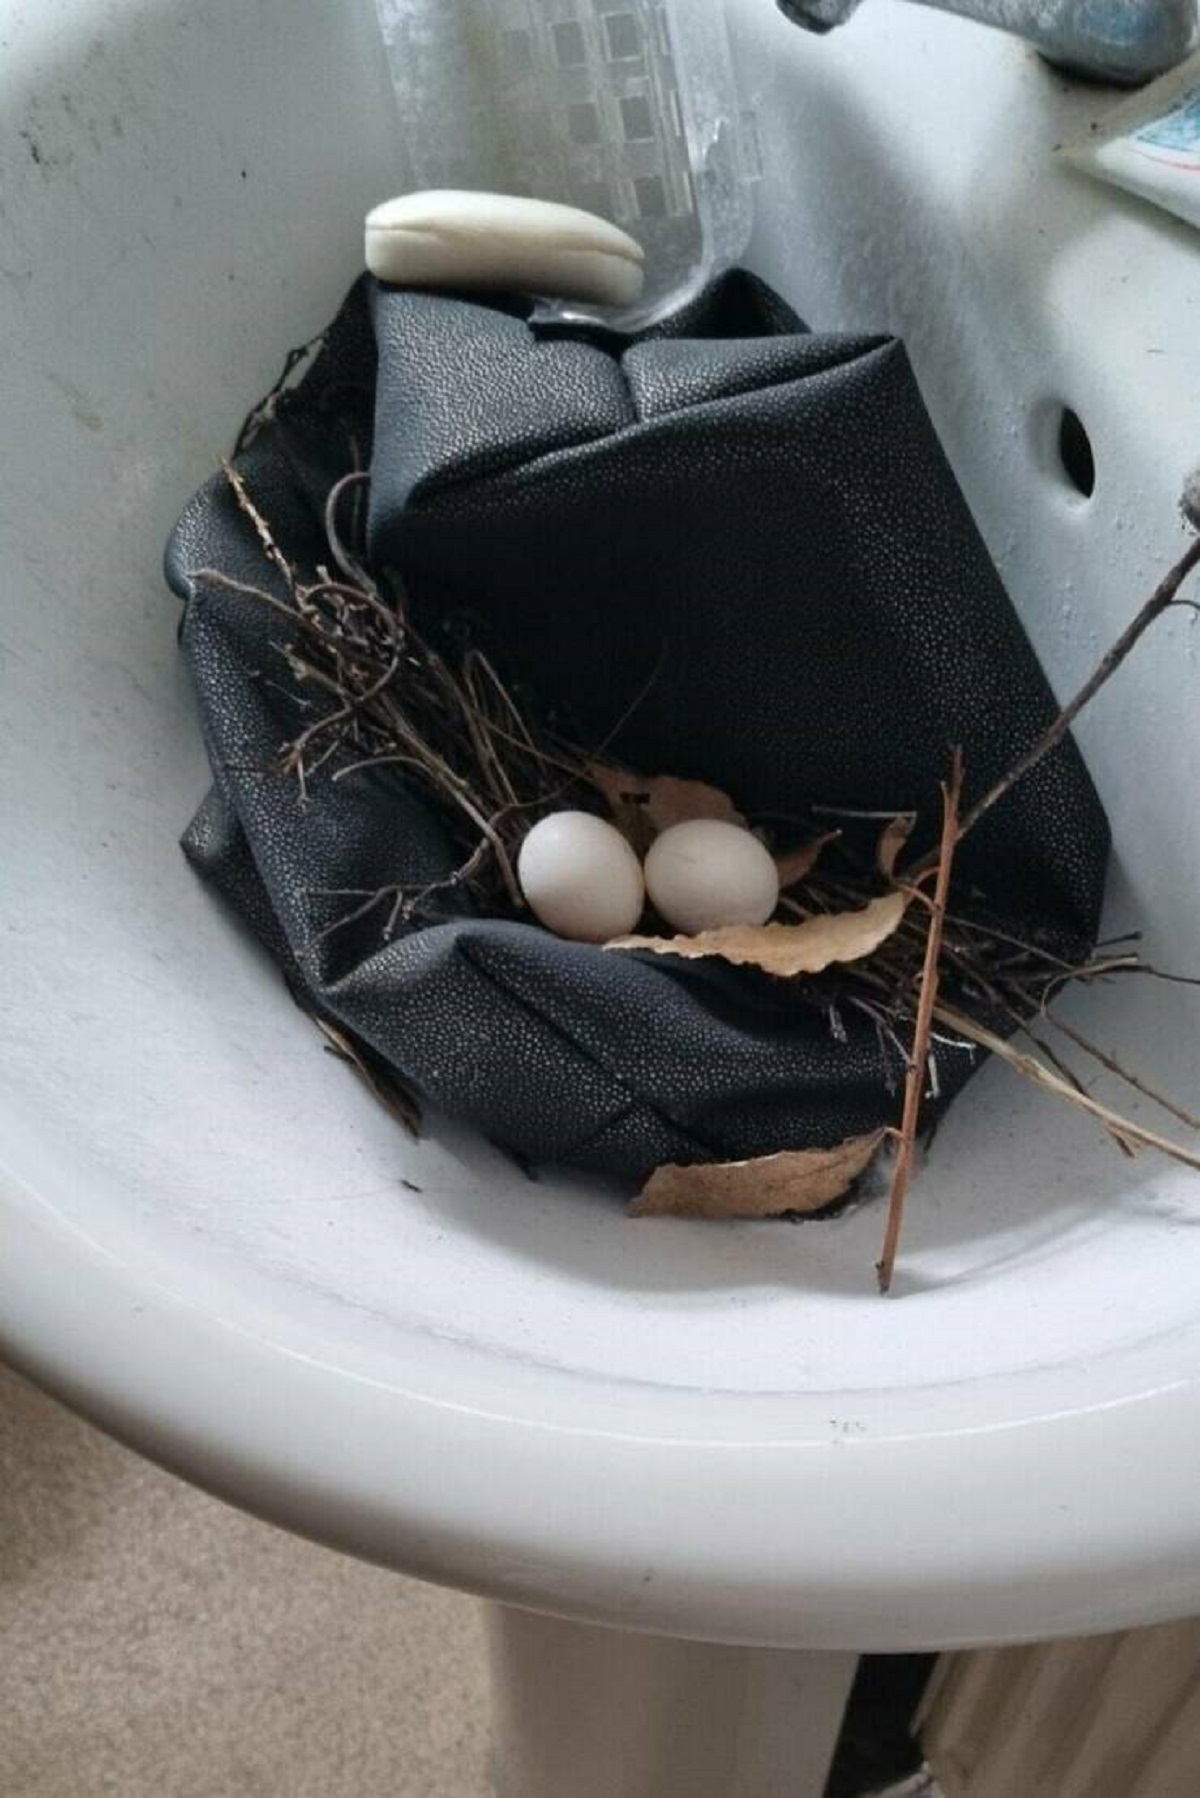 "Left My Bathroom Window Open For 3 Weeks Whilst I Was Away And A Bird Laid A Nest In My Sink"